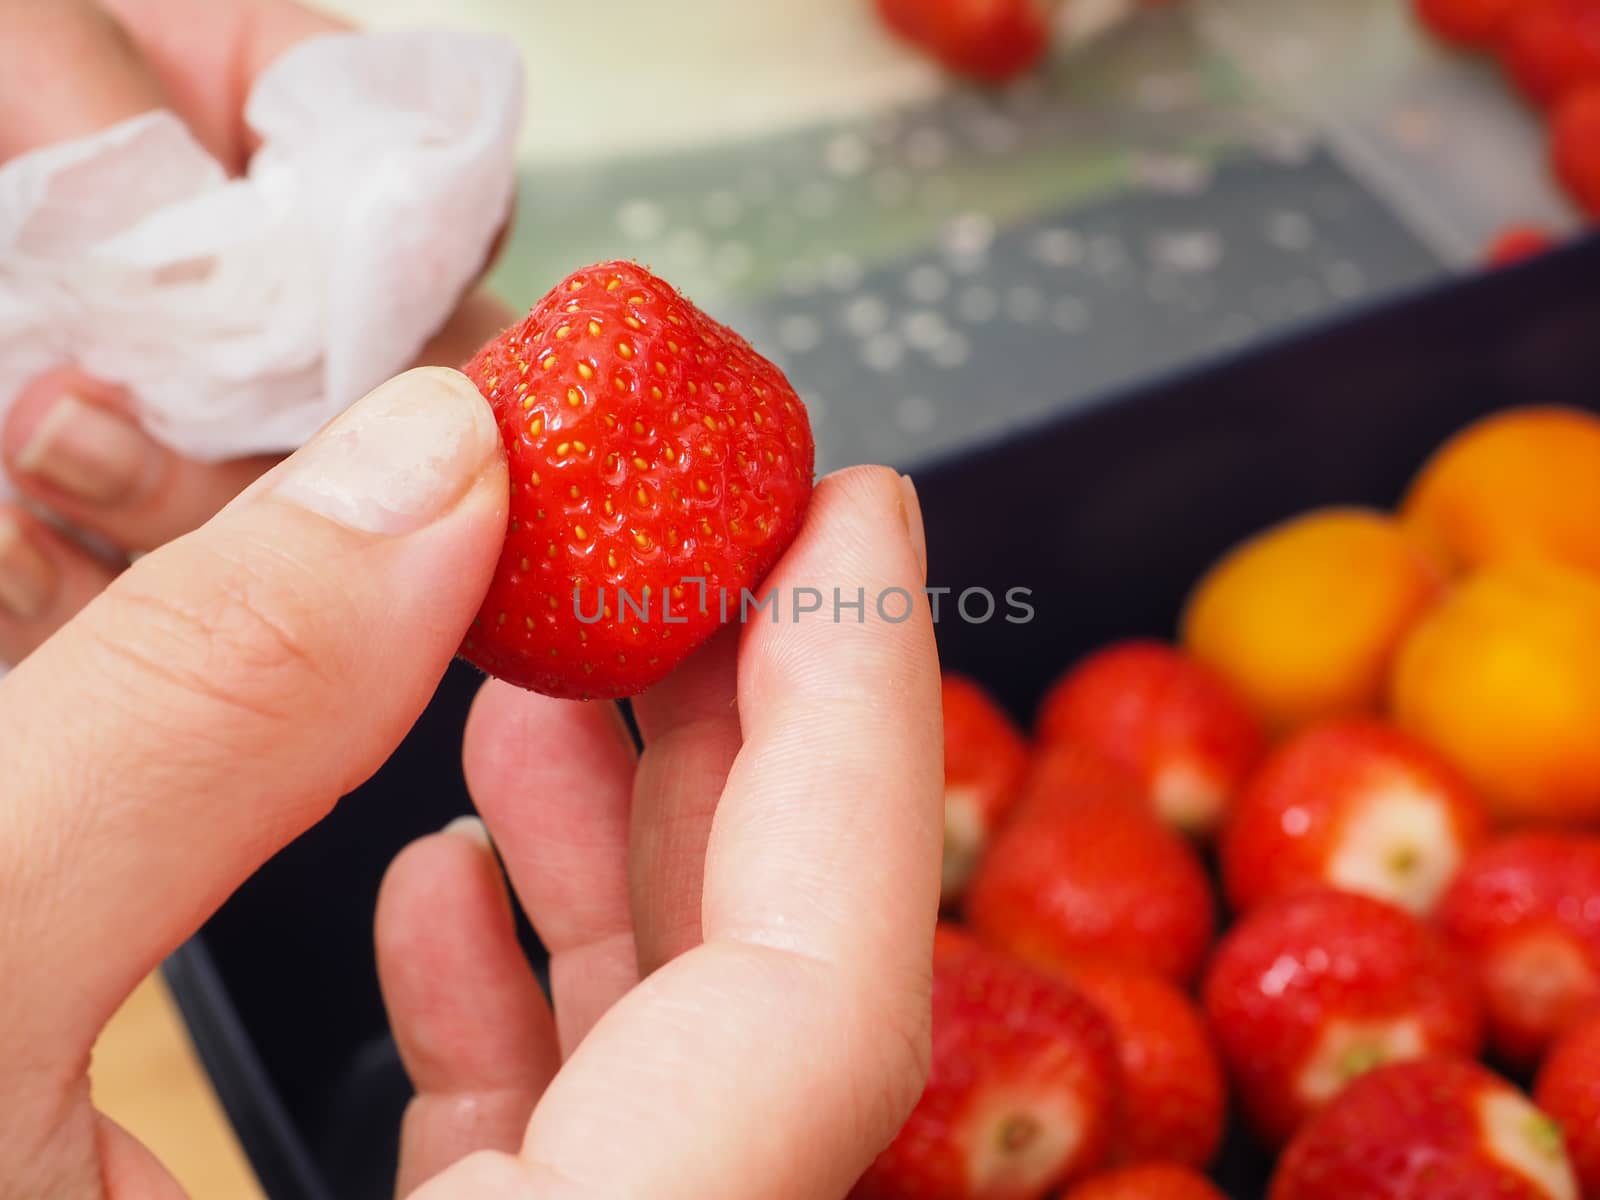 Female person holding a whole strawberry after washing and drying